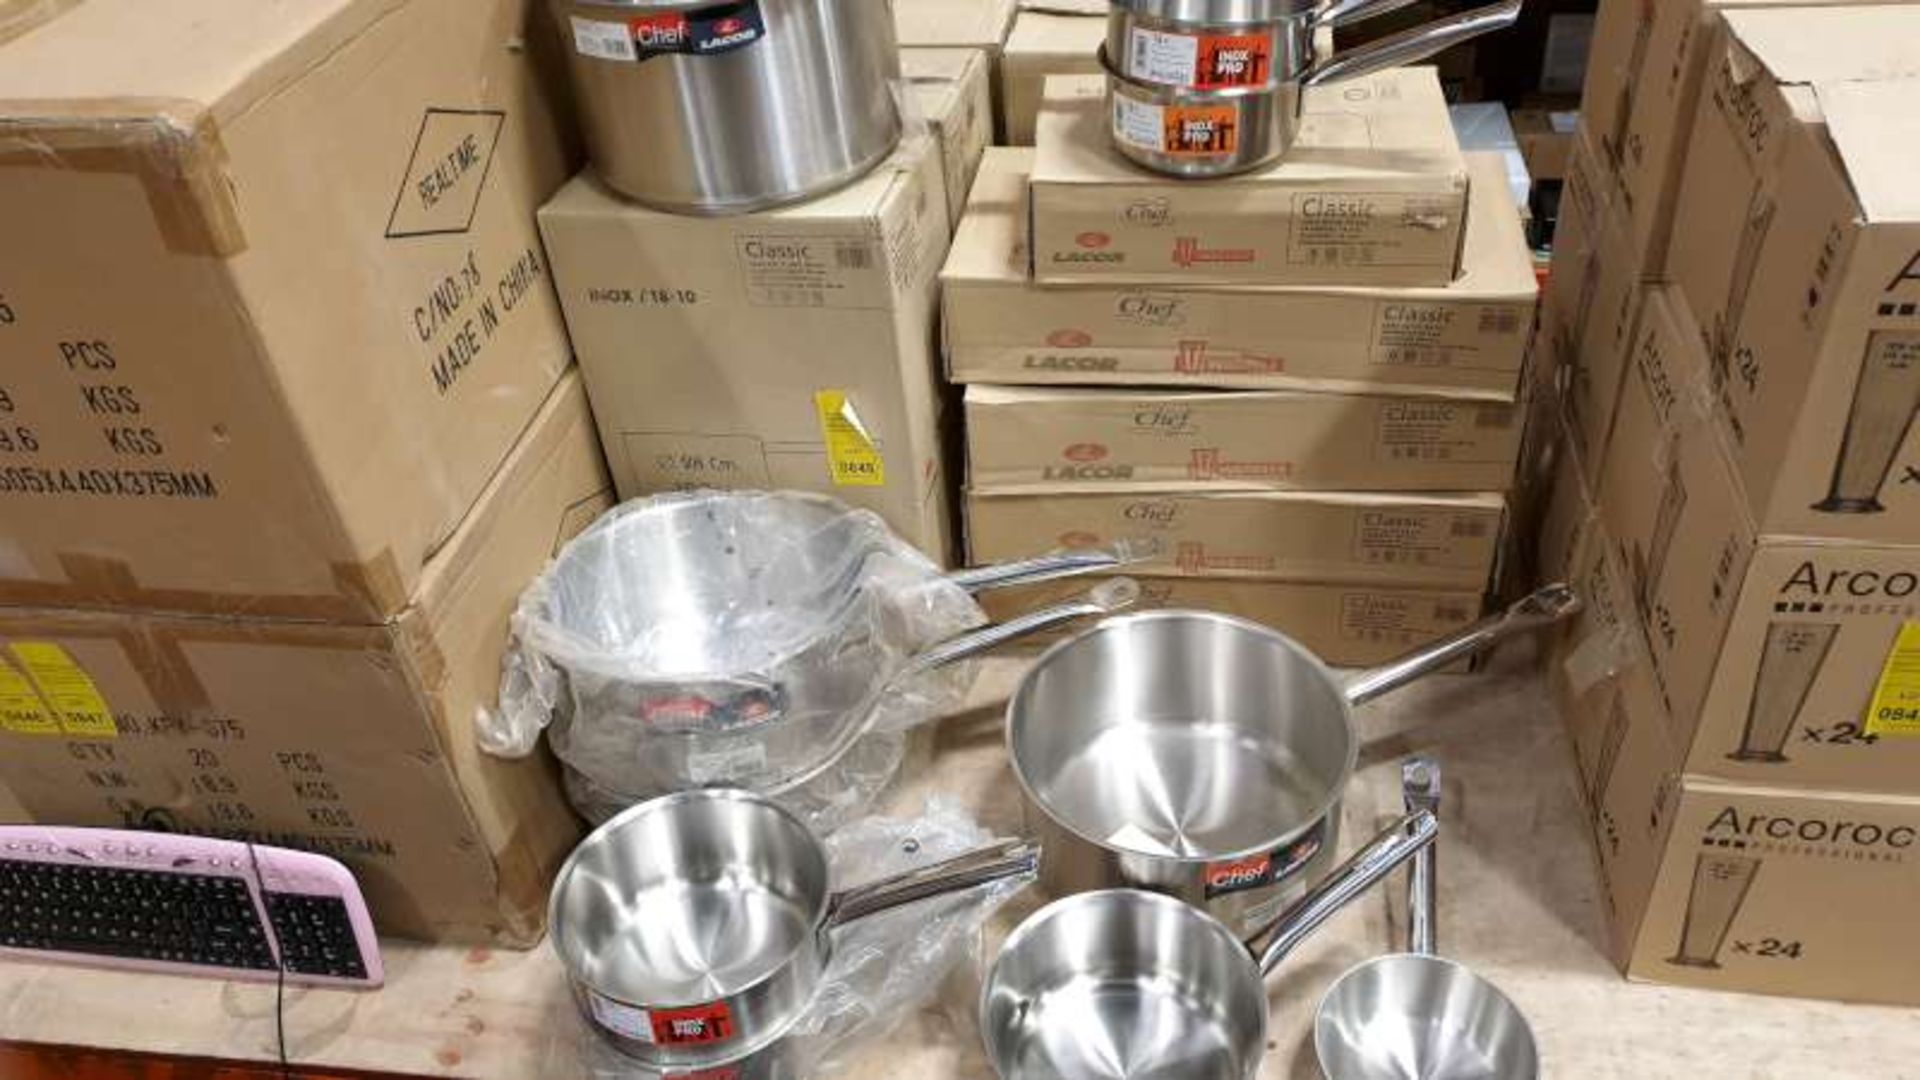 LOT CONTAINING INOX PRO AND CHEF LACOR STAINLESS STEEL PANS IN VARIOUS SIZES